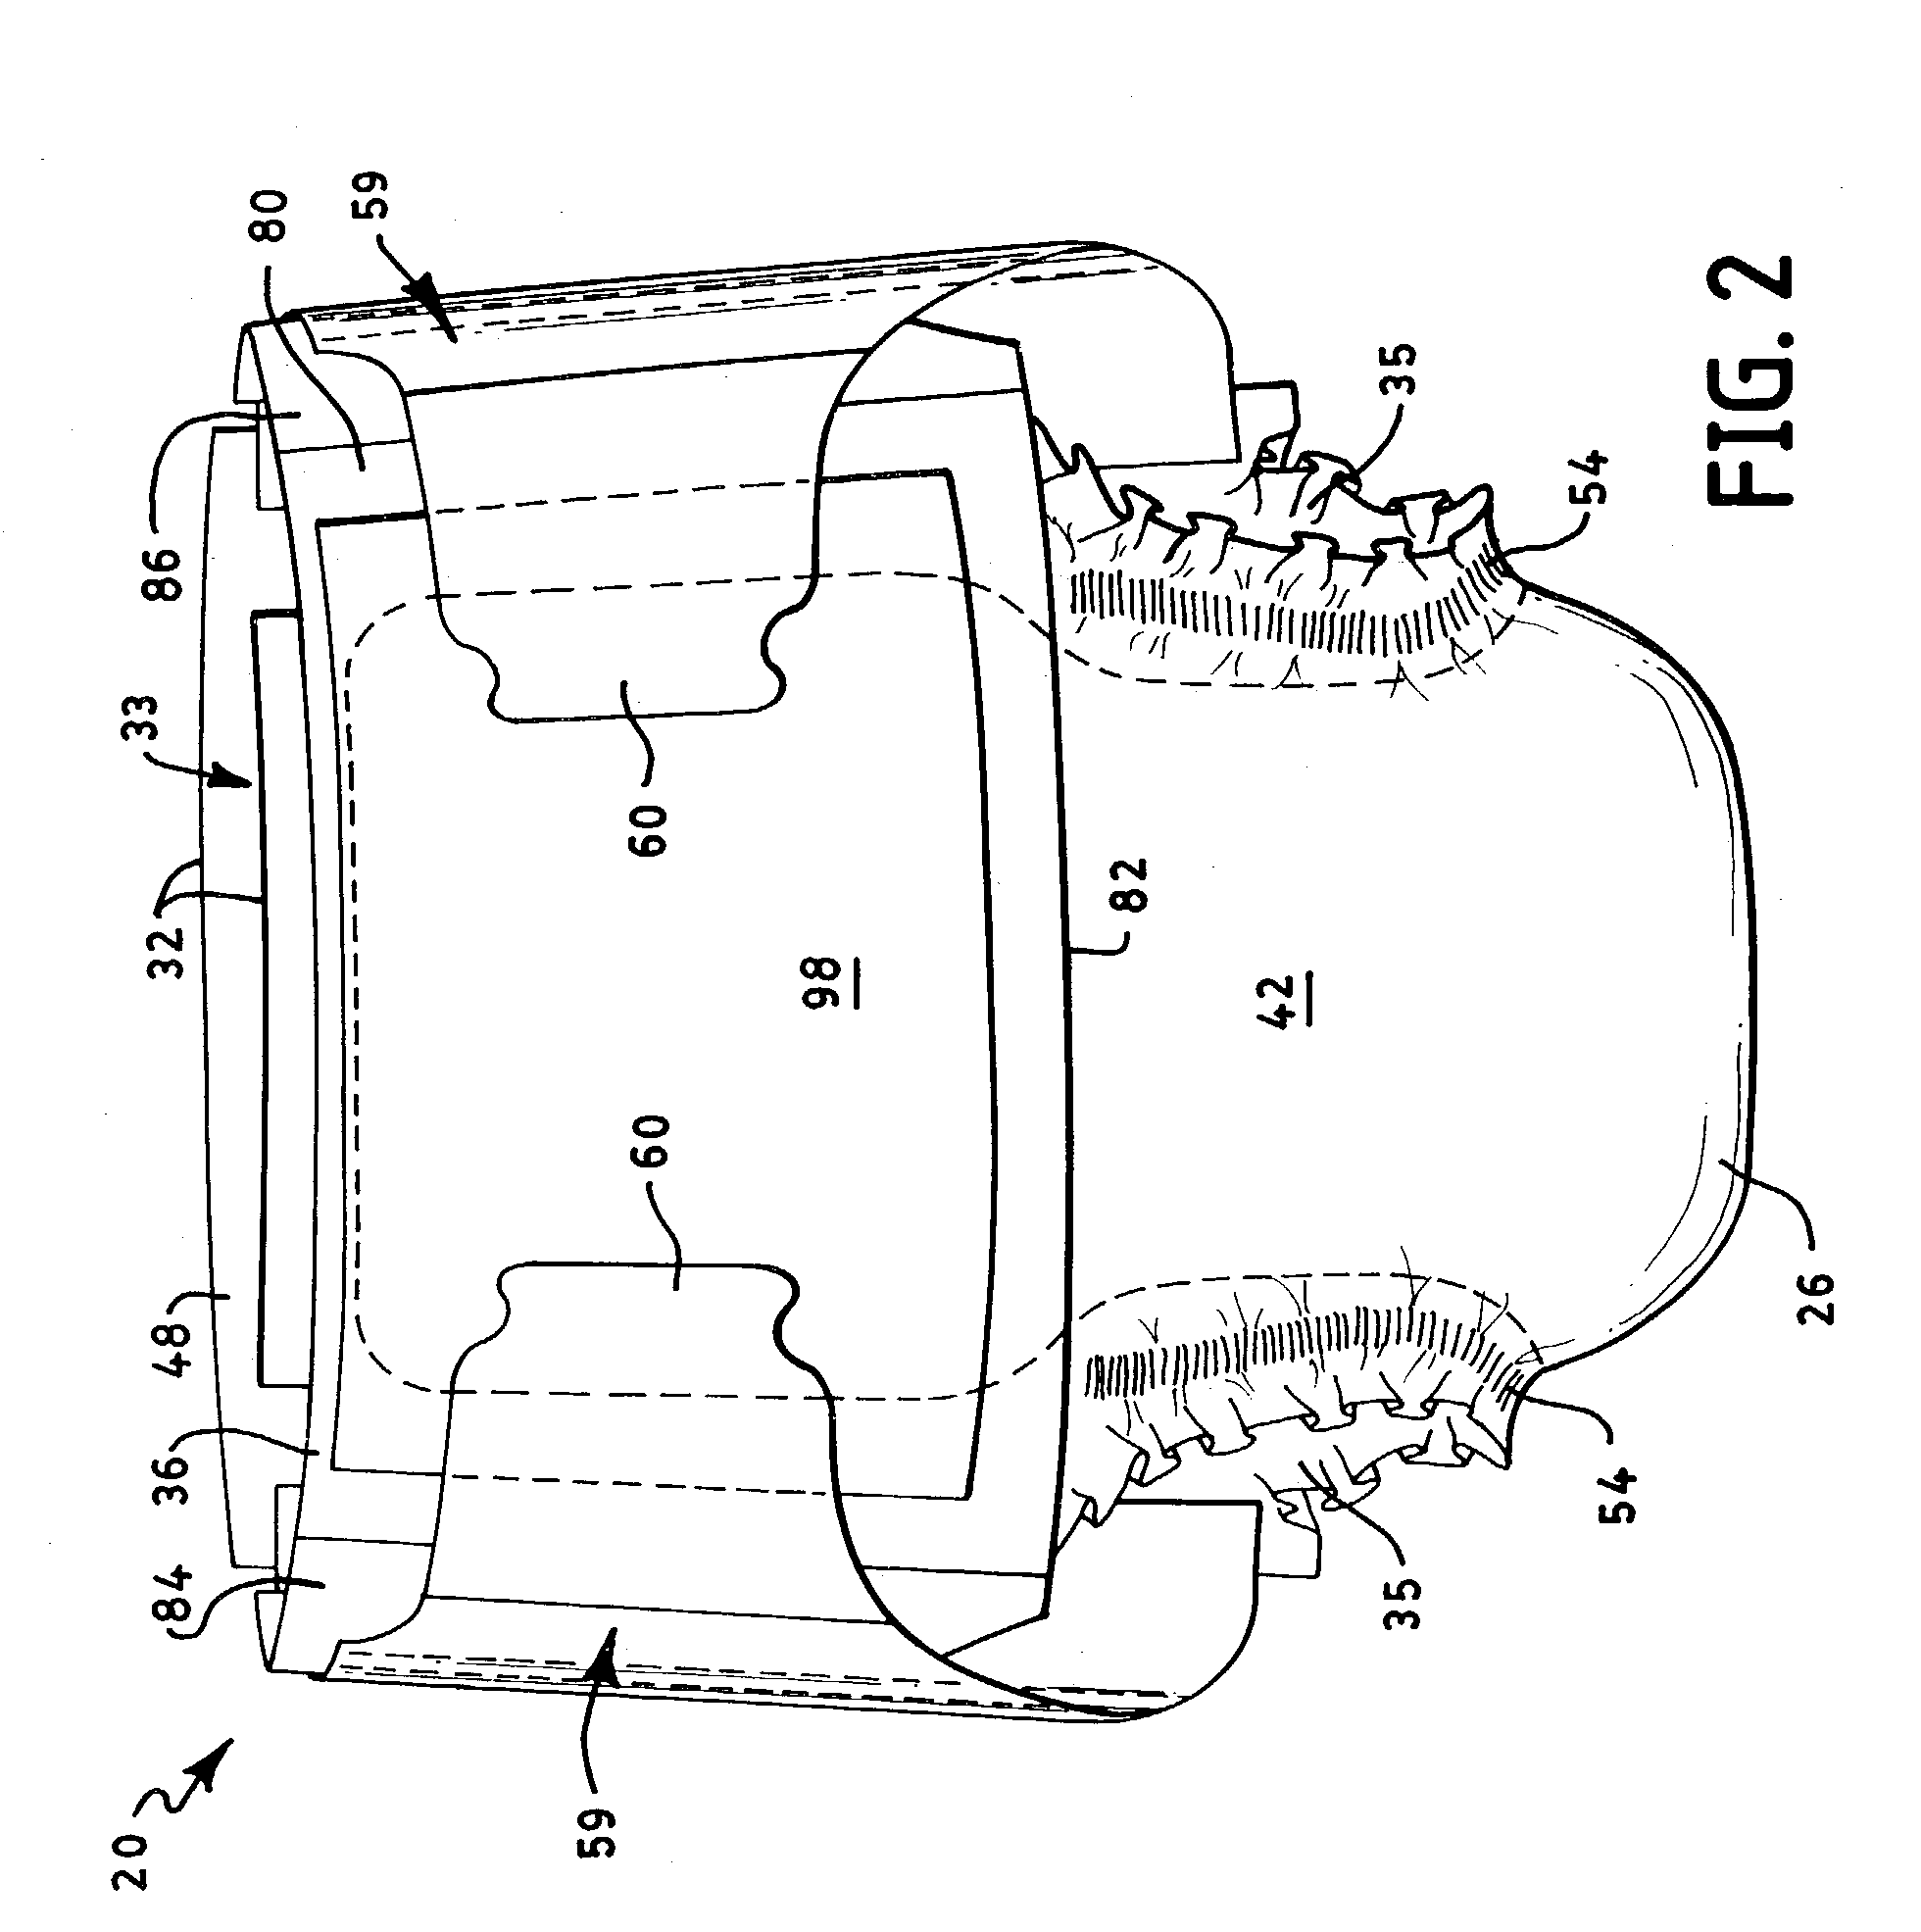 Attachment assembly for absorbent article